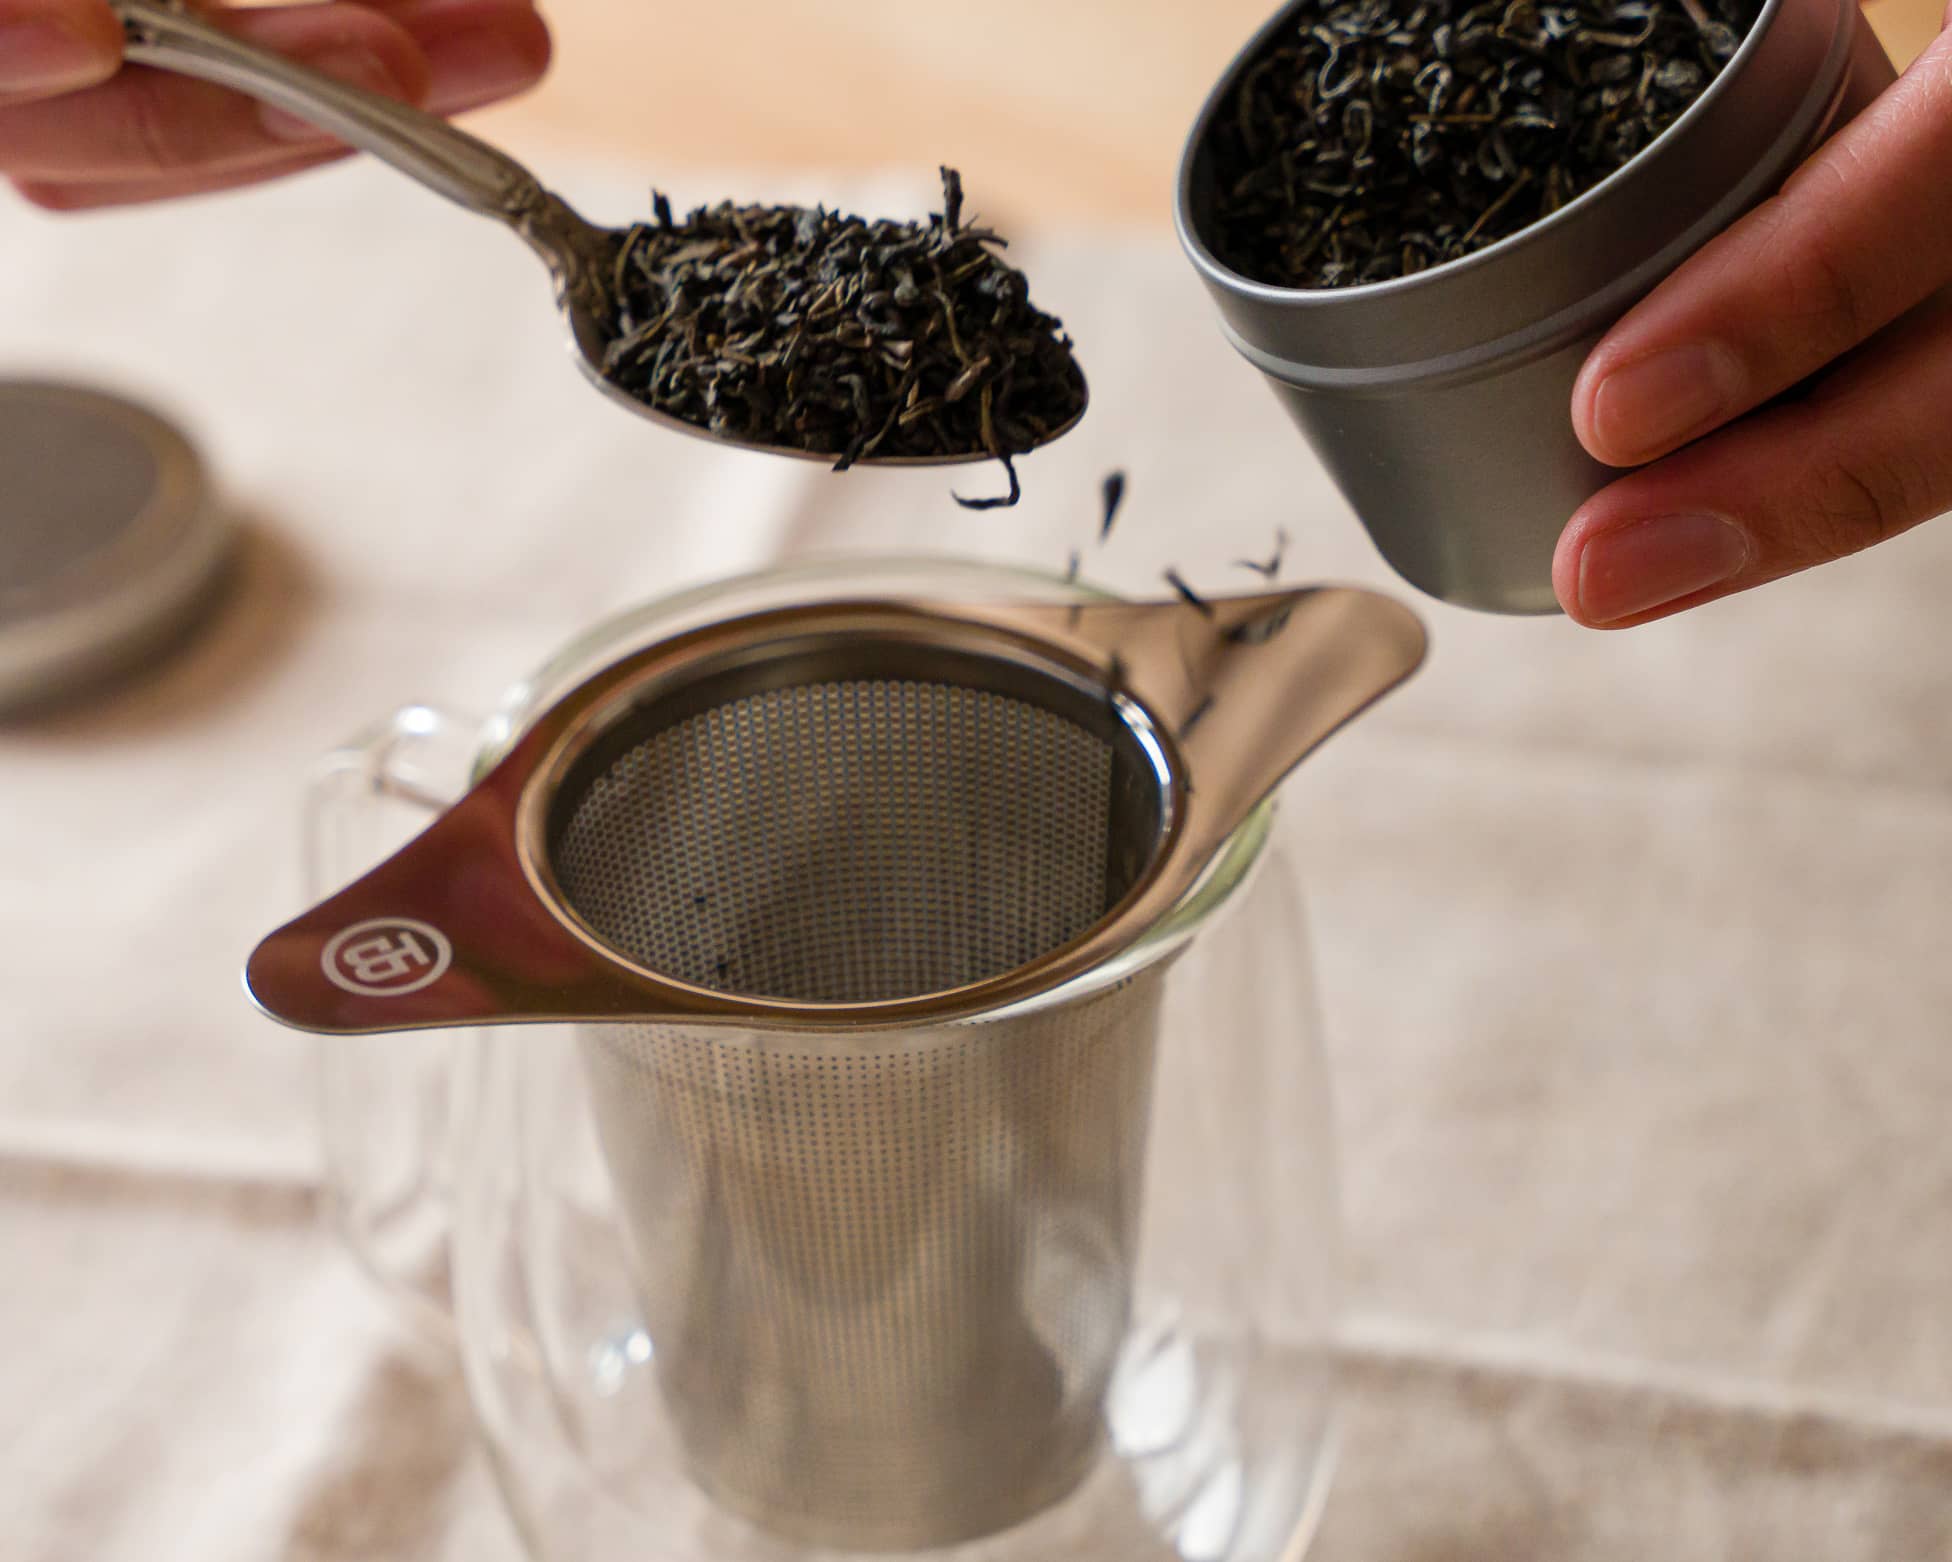 A spoonful of loose tea leaves being added to the tea infuser